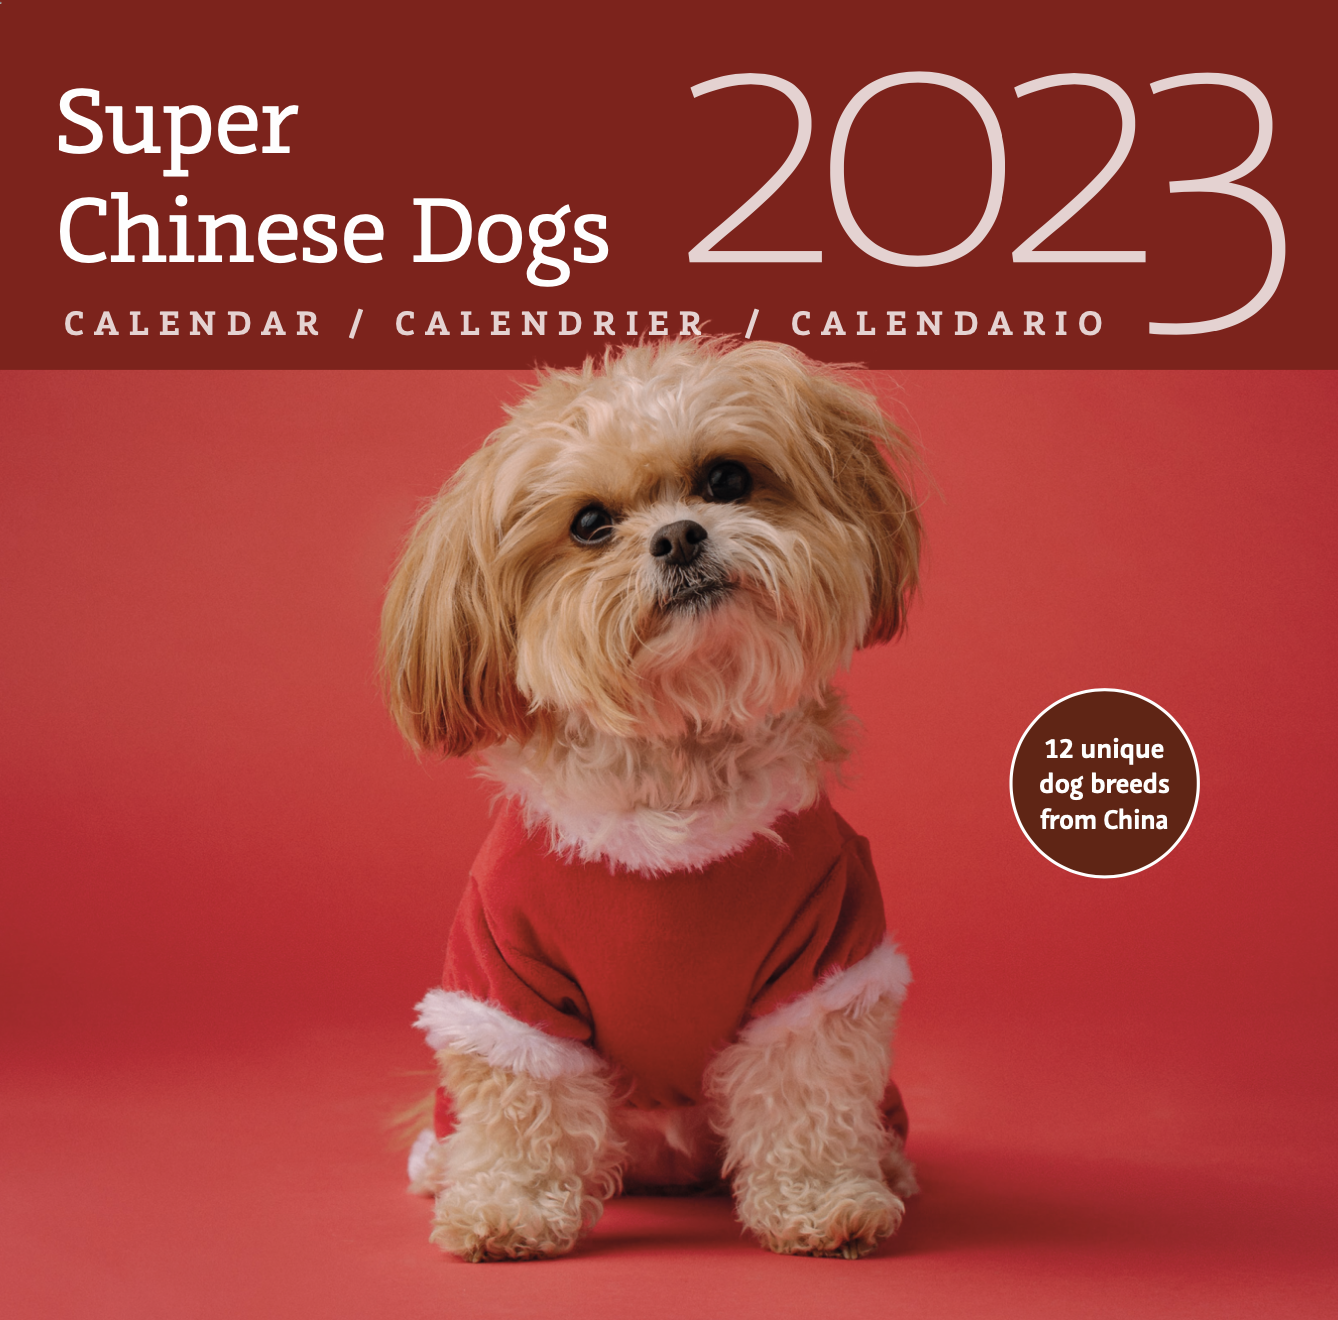 Super Chinese Dogs 2023 Wall Calendar